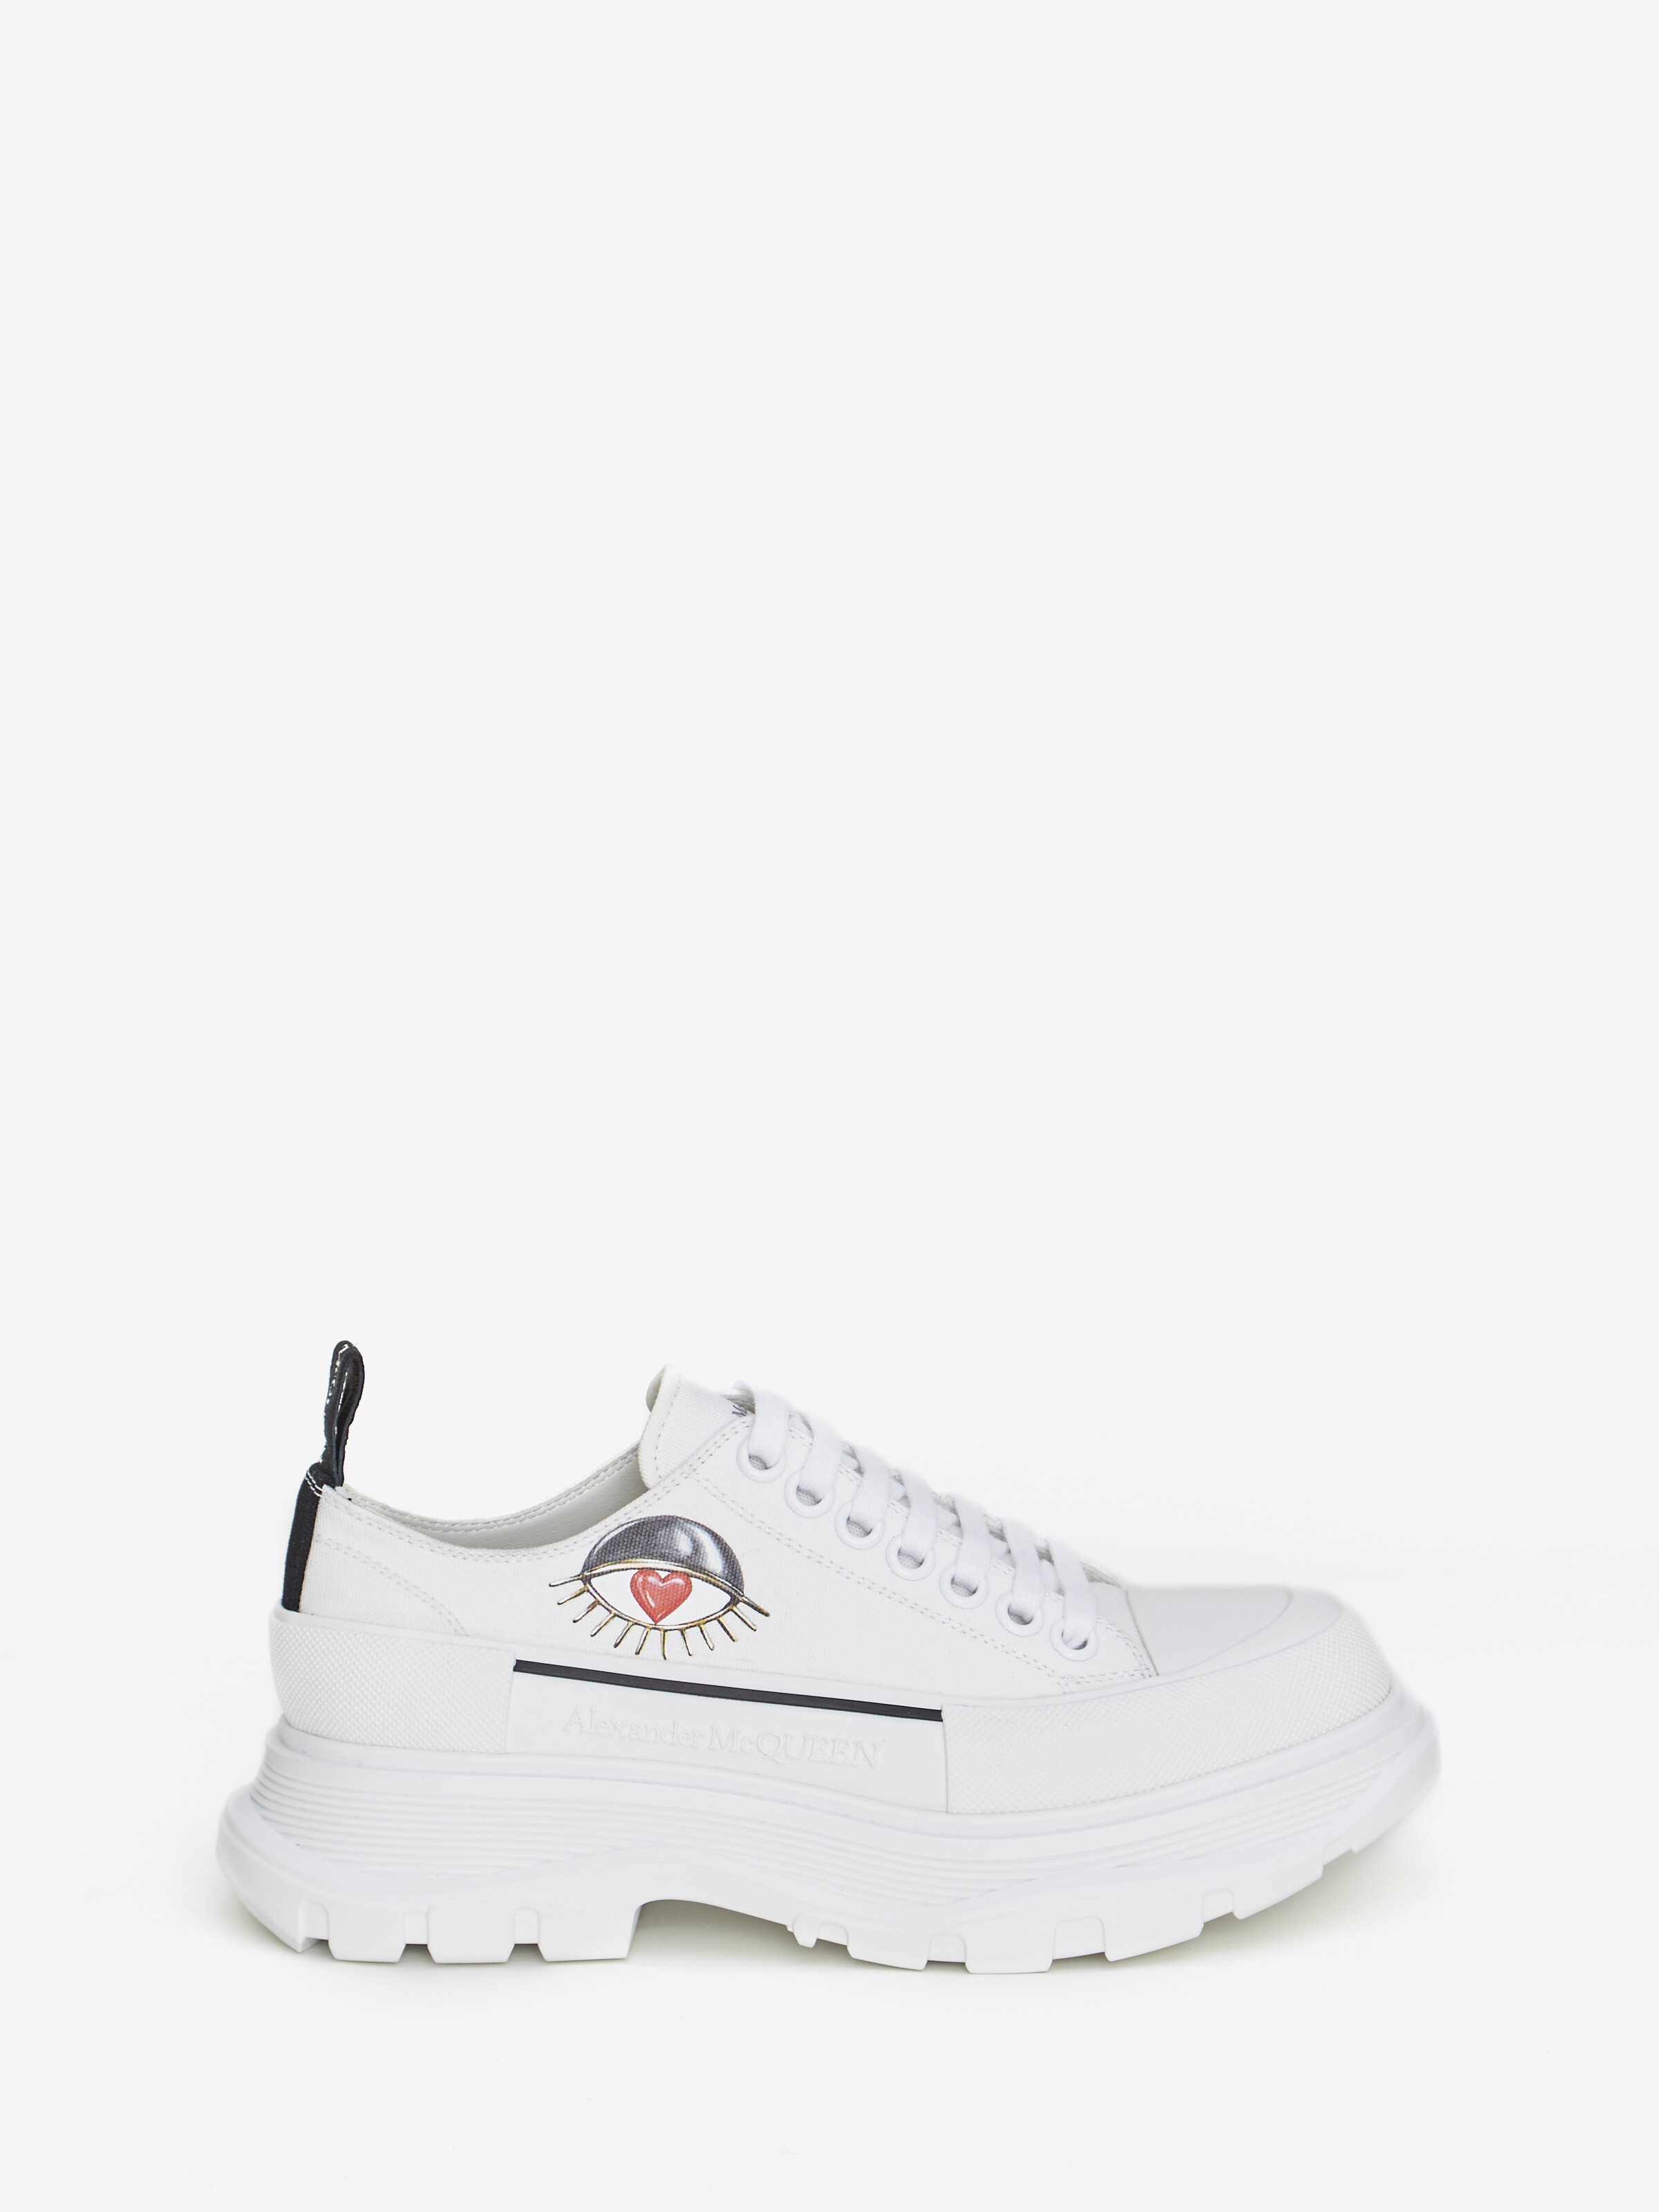 Alexander Mcqueen Tread Slick Lace Up In White/black/red